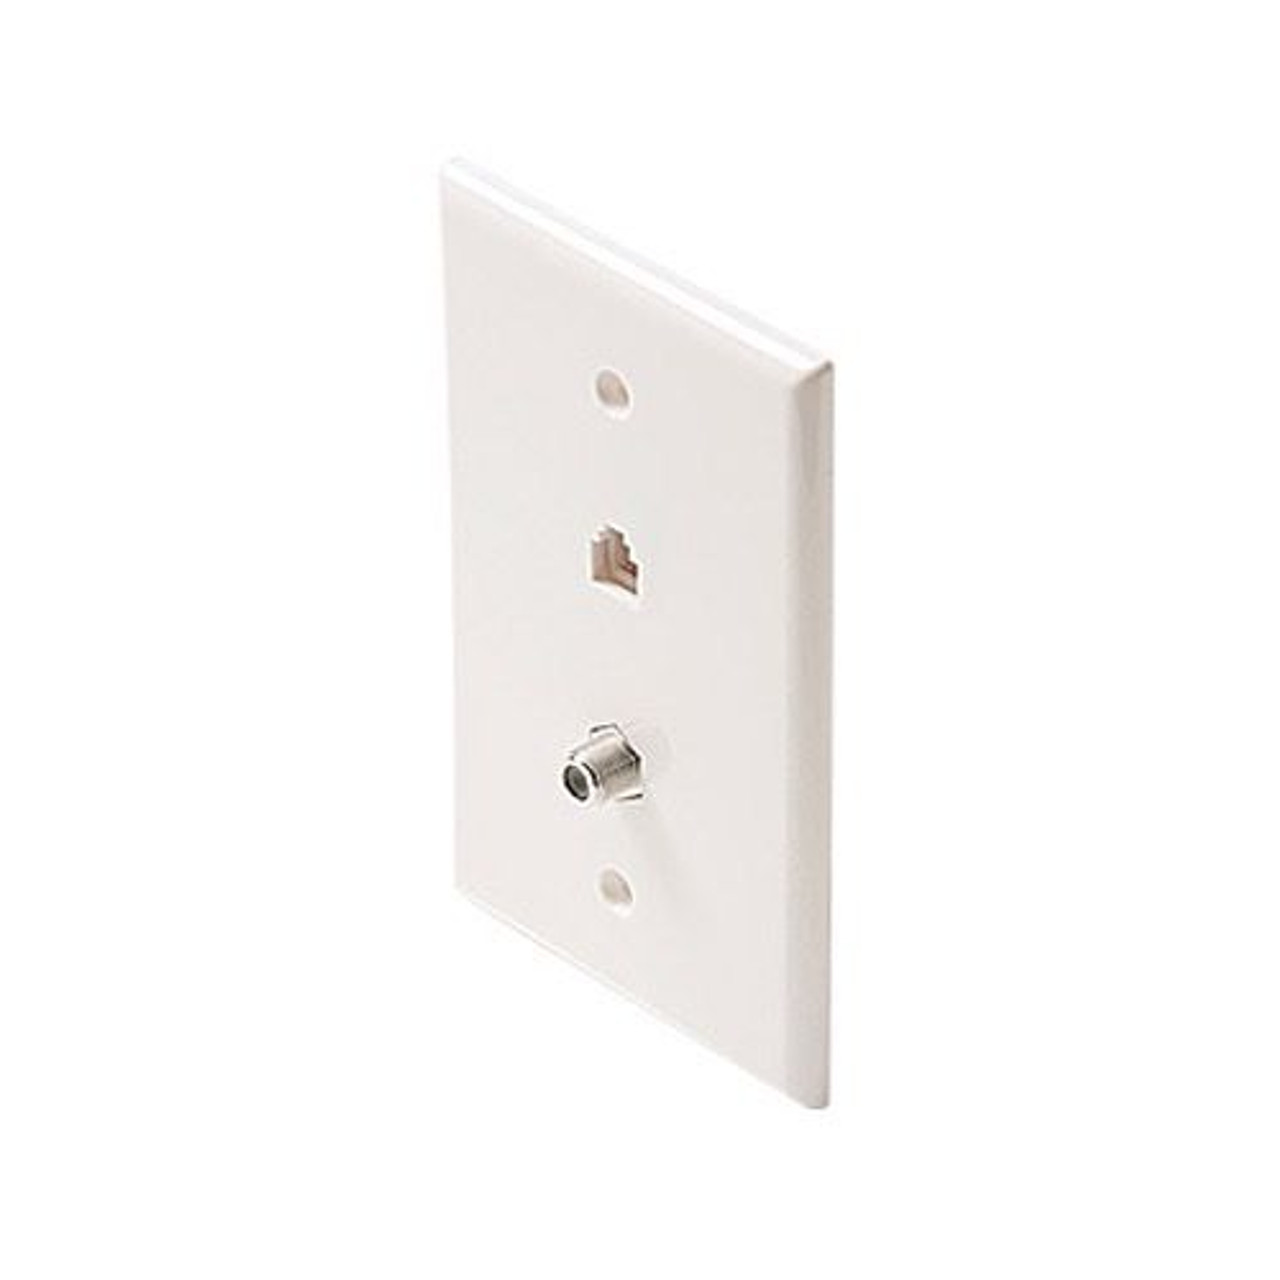 Leviton C2450W Dual Wall Plate Phone Jack F Type Coax Combo White RJ11 RJ-11 Coax Cable Data Line Audio Signal Video 75 Ohm Coaxial Plug, 2 Device Outlet Cover, Part #  C-2450-W